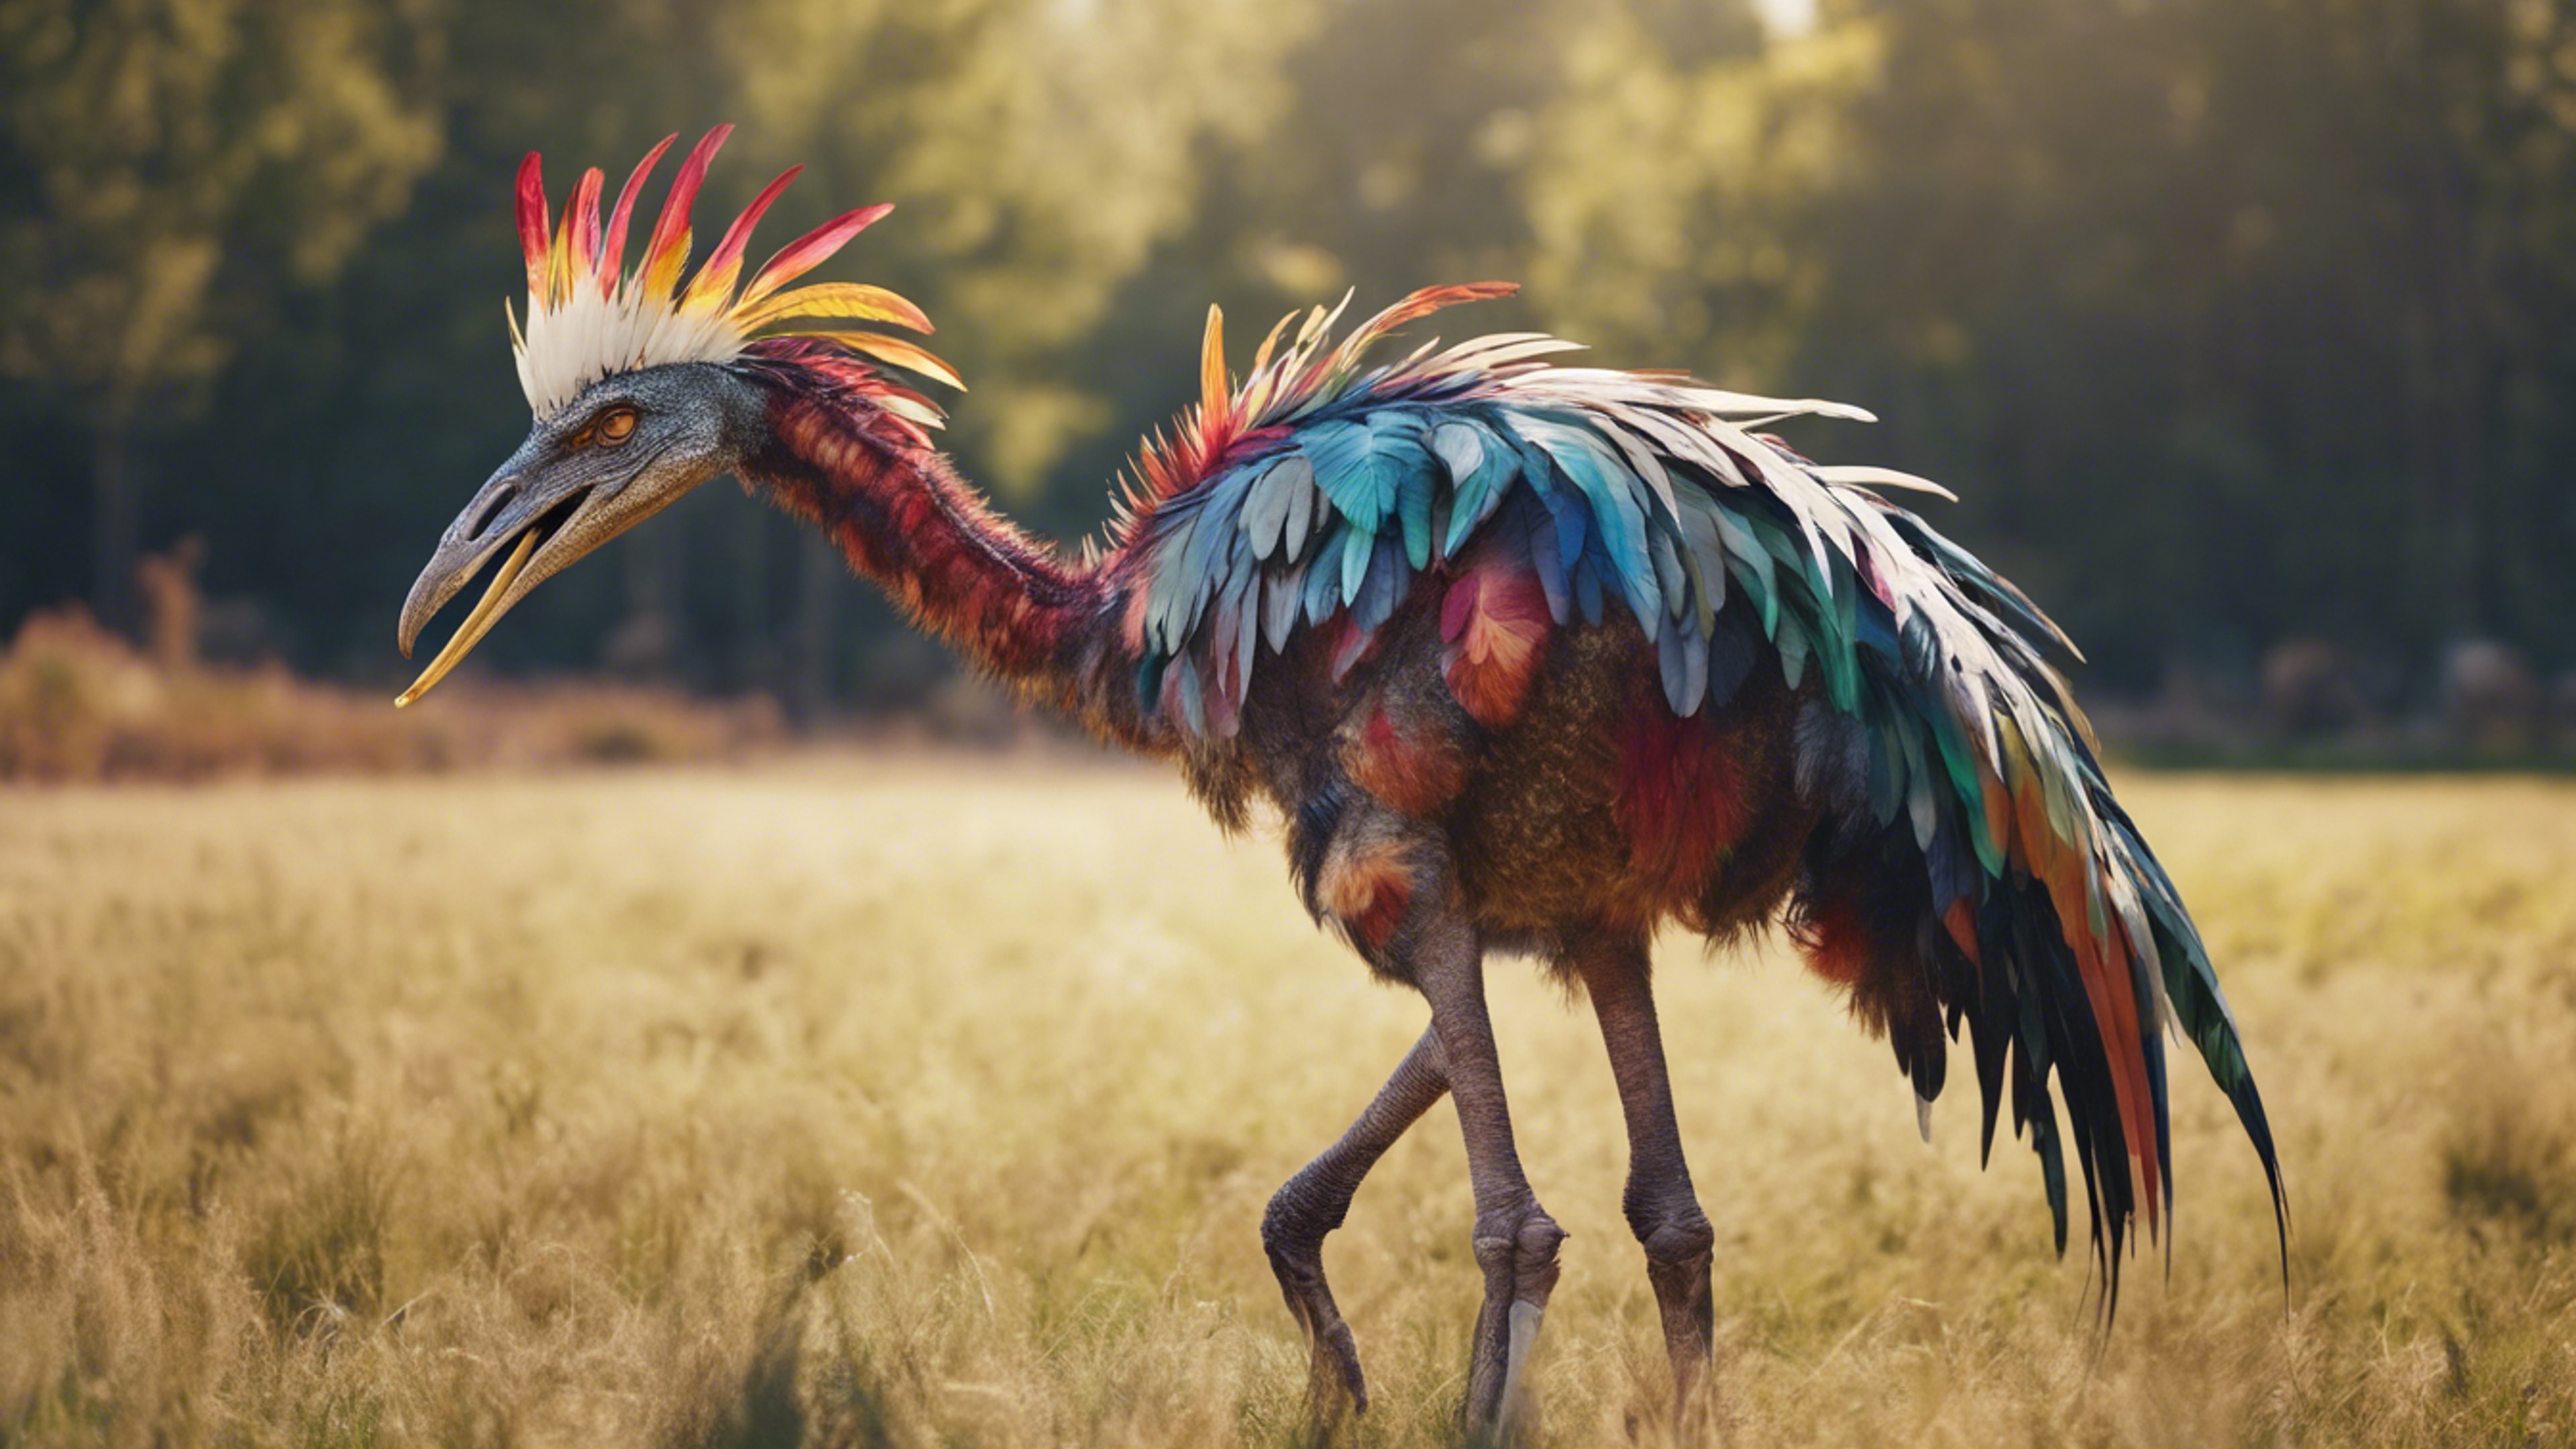 A Struthiomimus with colorful feathers prancing around in an open meadow.壁紙[bbeb240df8e5485aba58]